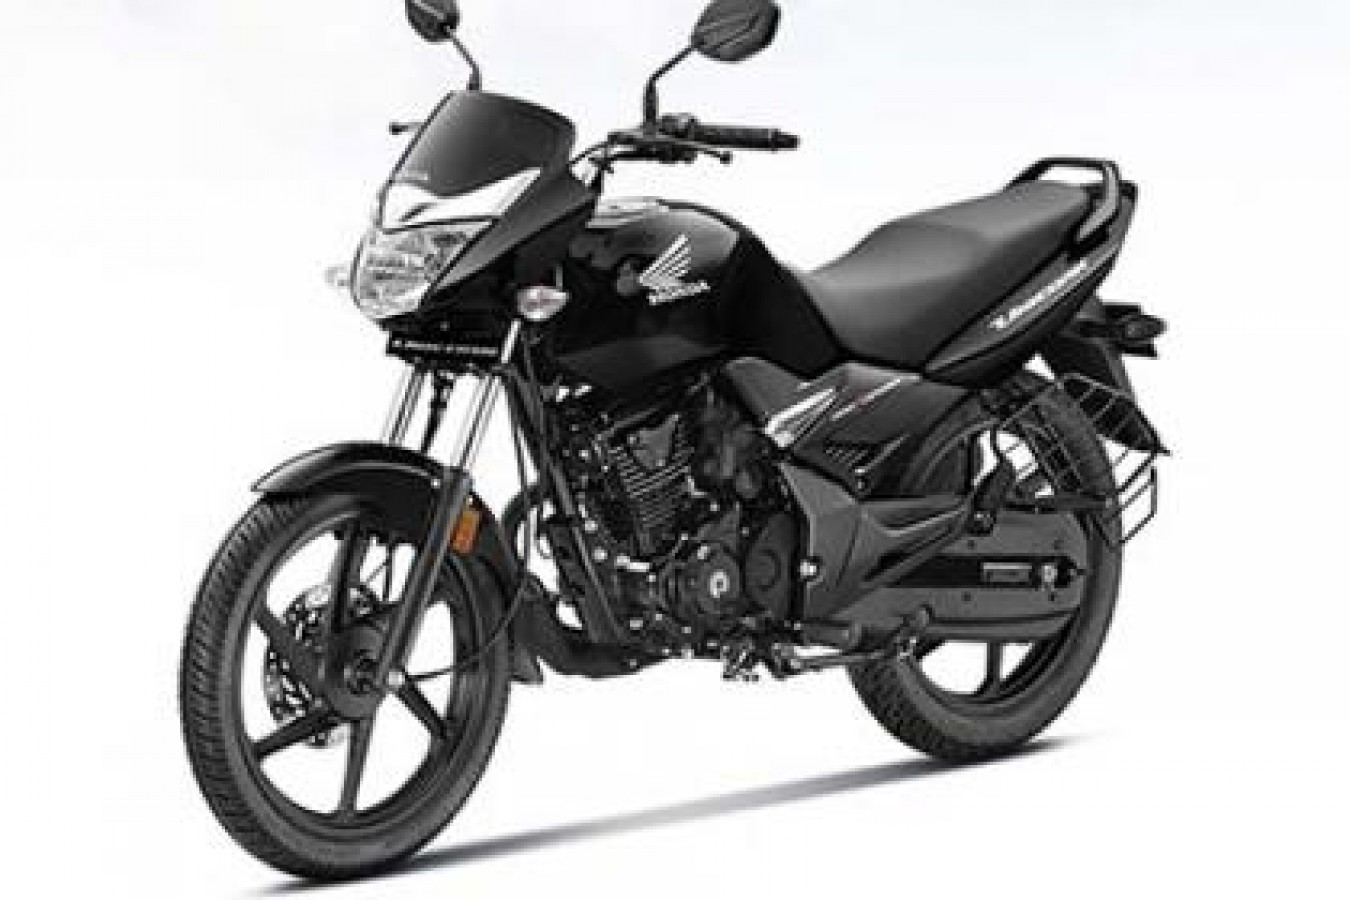 Know Comparison Between Hero Xtreme 160r And Honda Unicorn Bs6